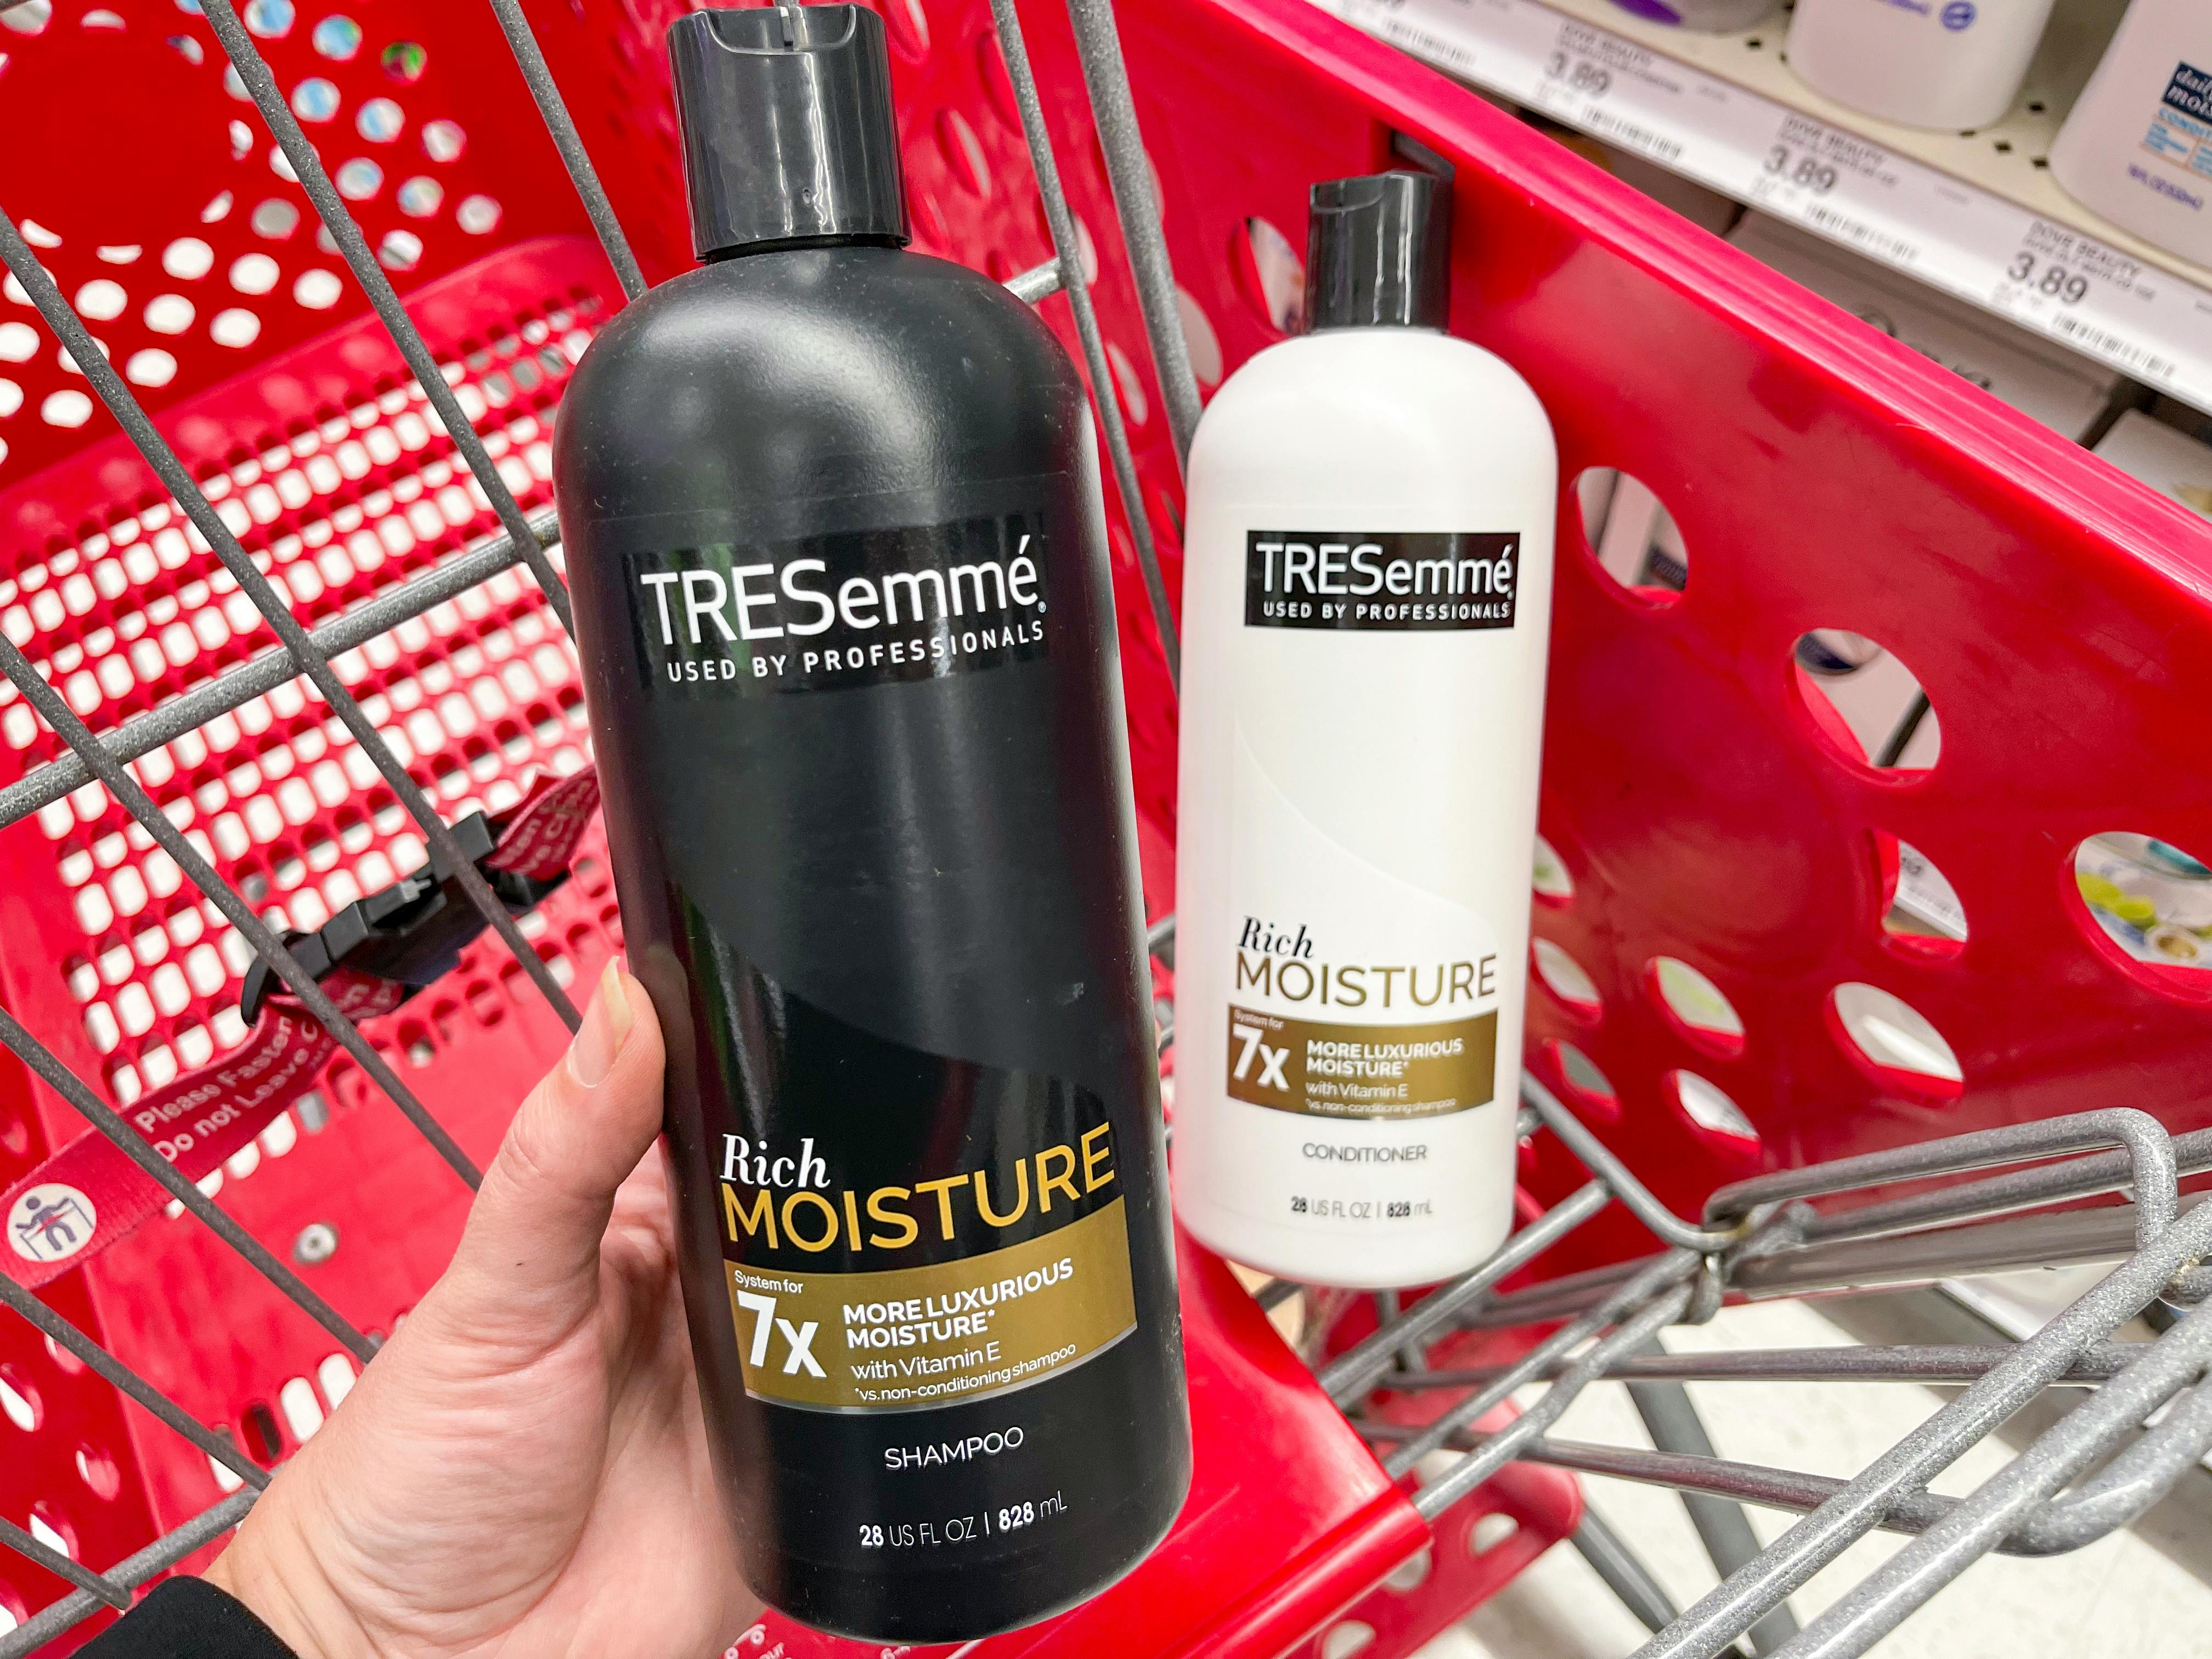 Tresemme shampoo and conditioner in a red Target shopping cart.